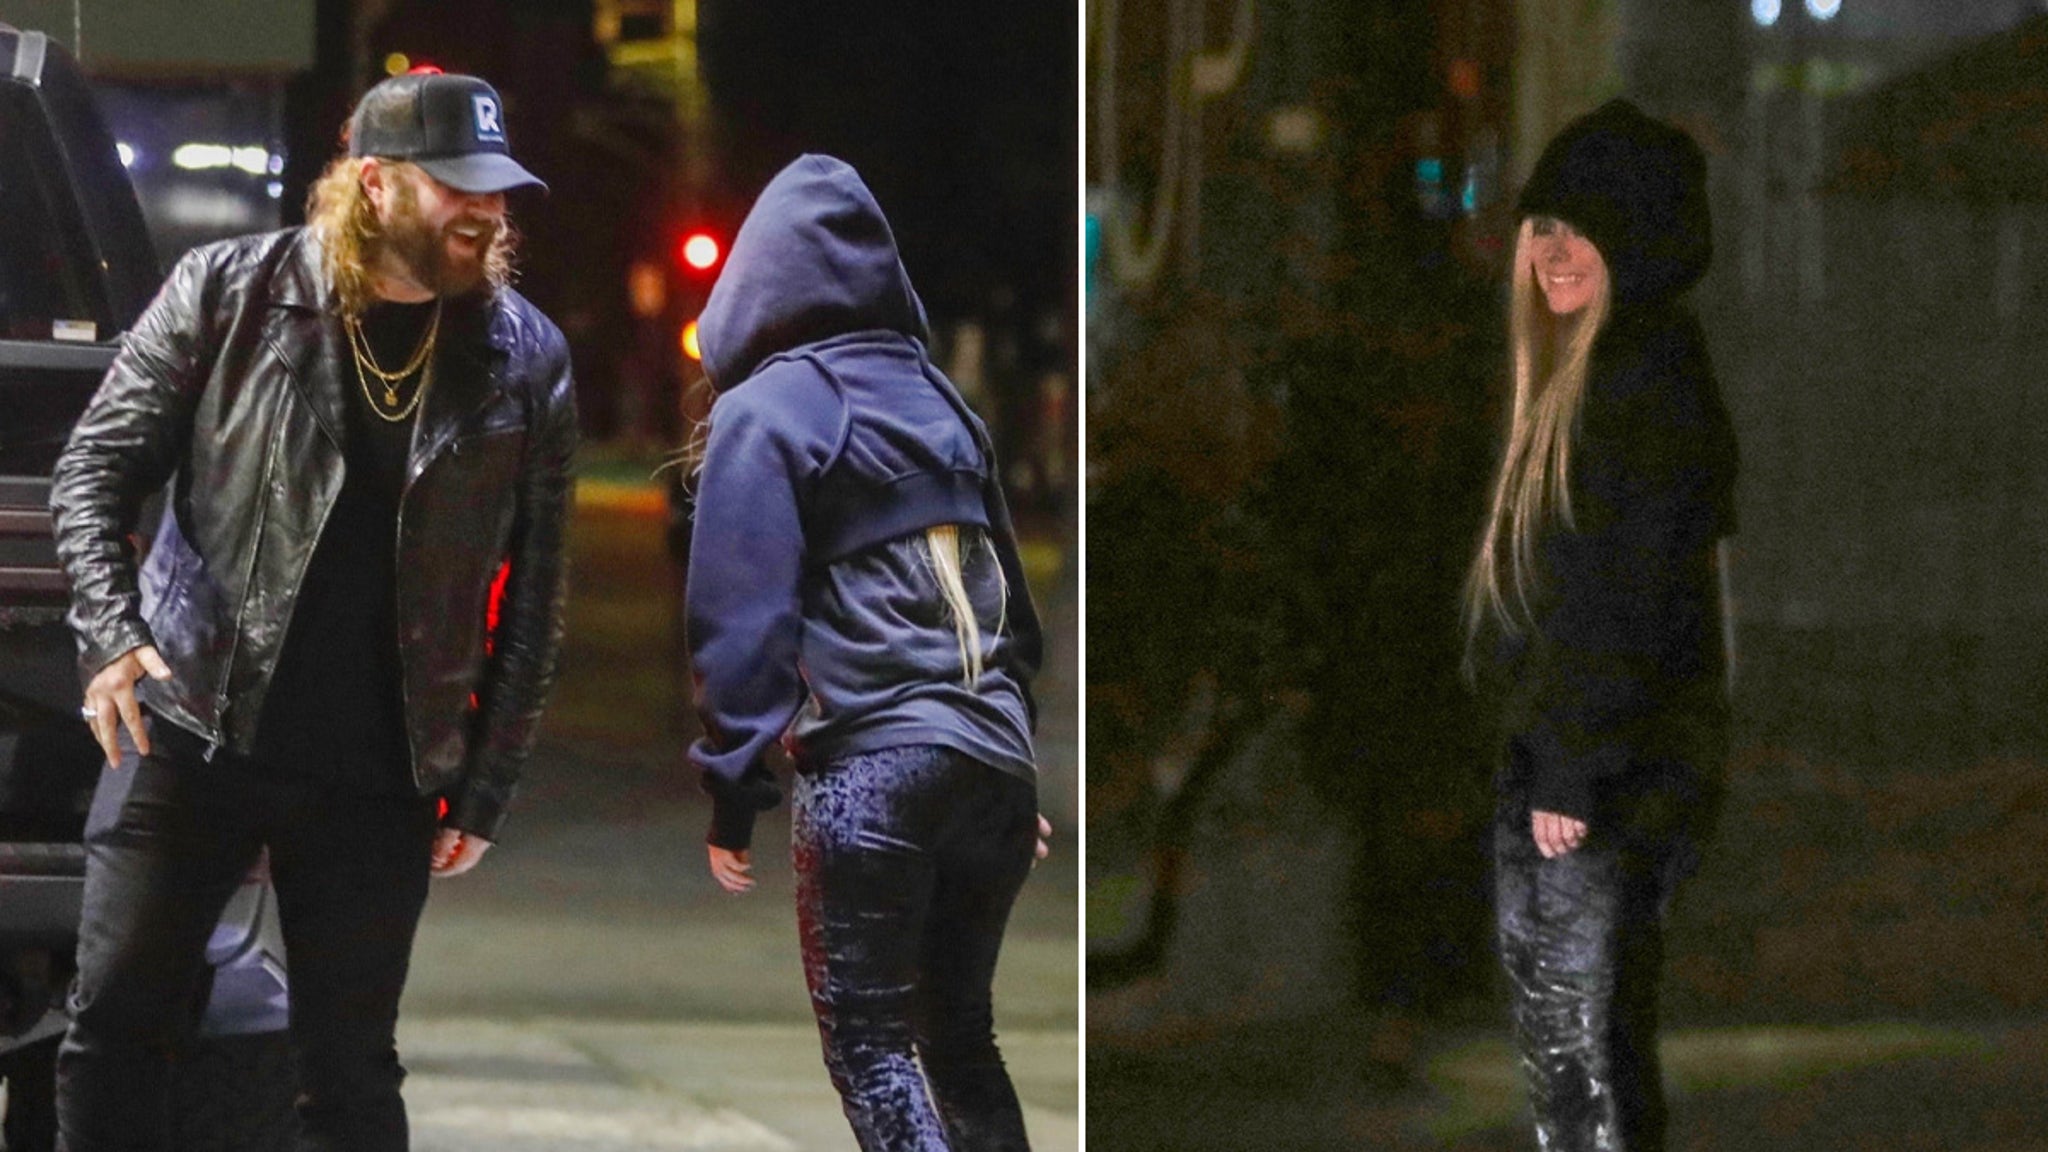 Avril Lavigne Goes on Skate Date with TikTok Country Singer Nate Smith